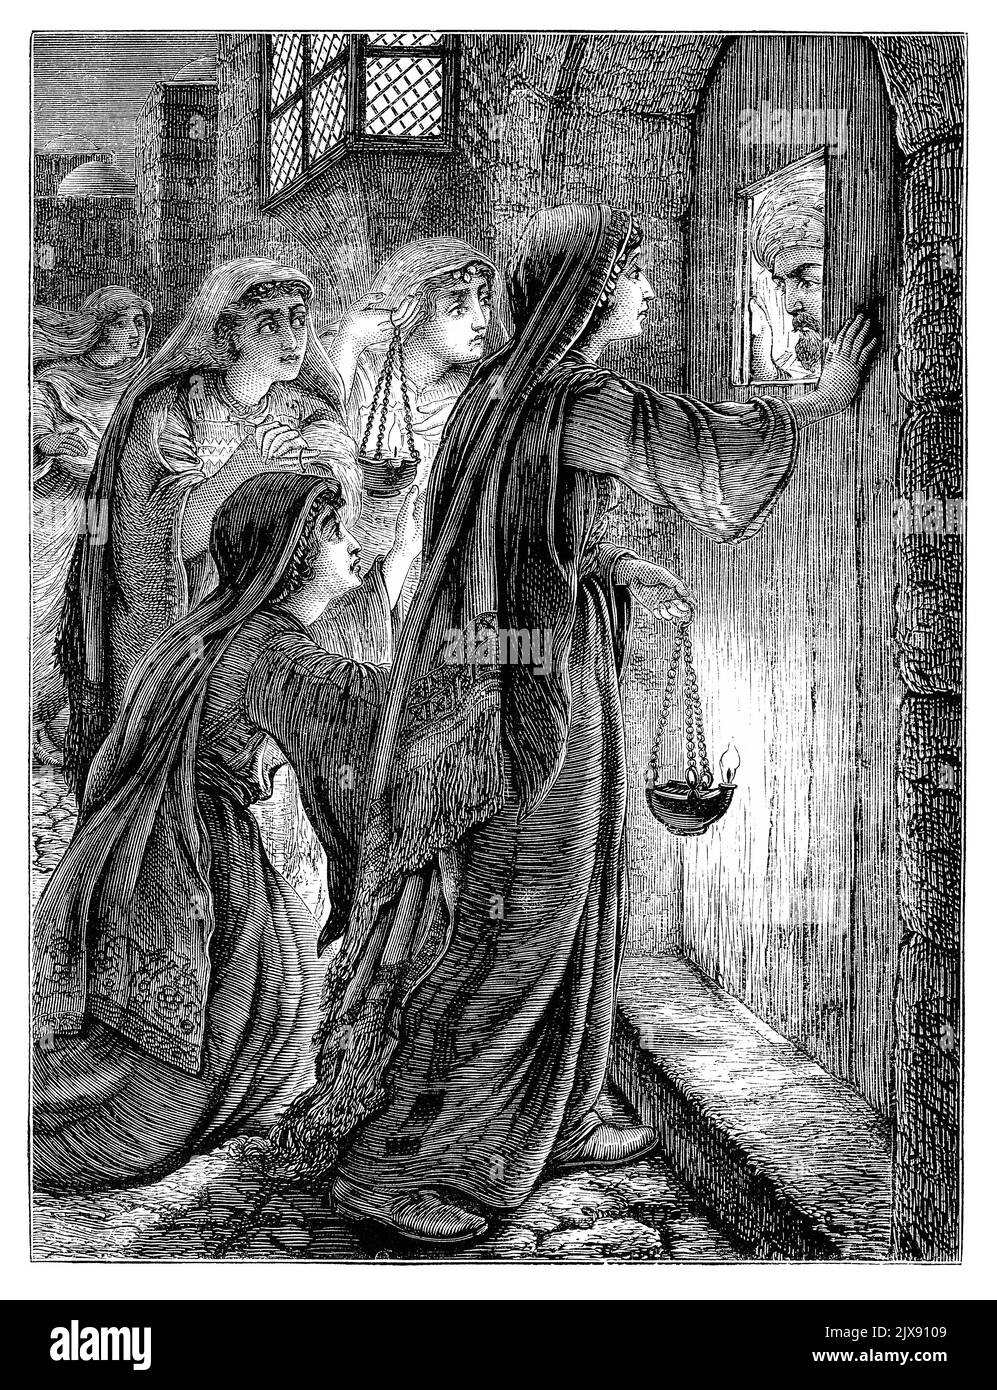 1872 vintage Victorian engraving of the Parable of the Ten Virgins (also known as the Parable of the Wise and Foolish Virgins), showing the five foolish virgins being refused admission to the arrival of the bridegroom. Stock Photo